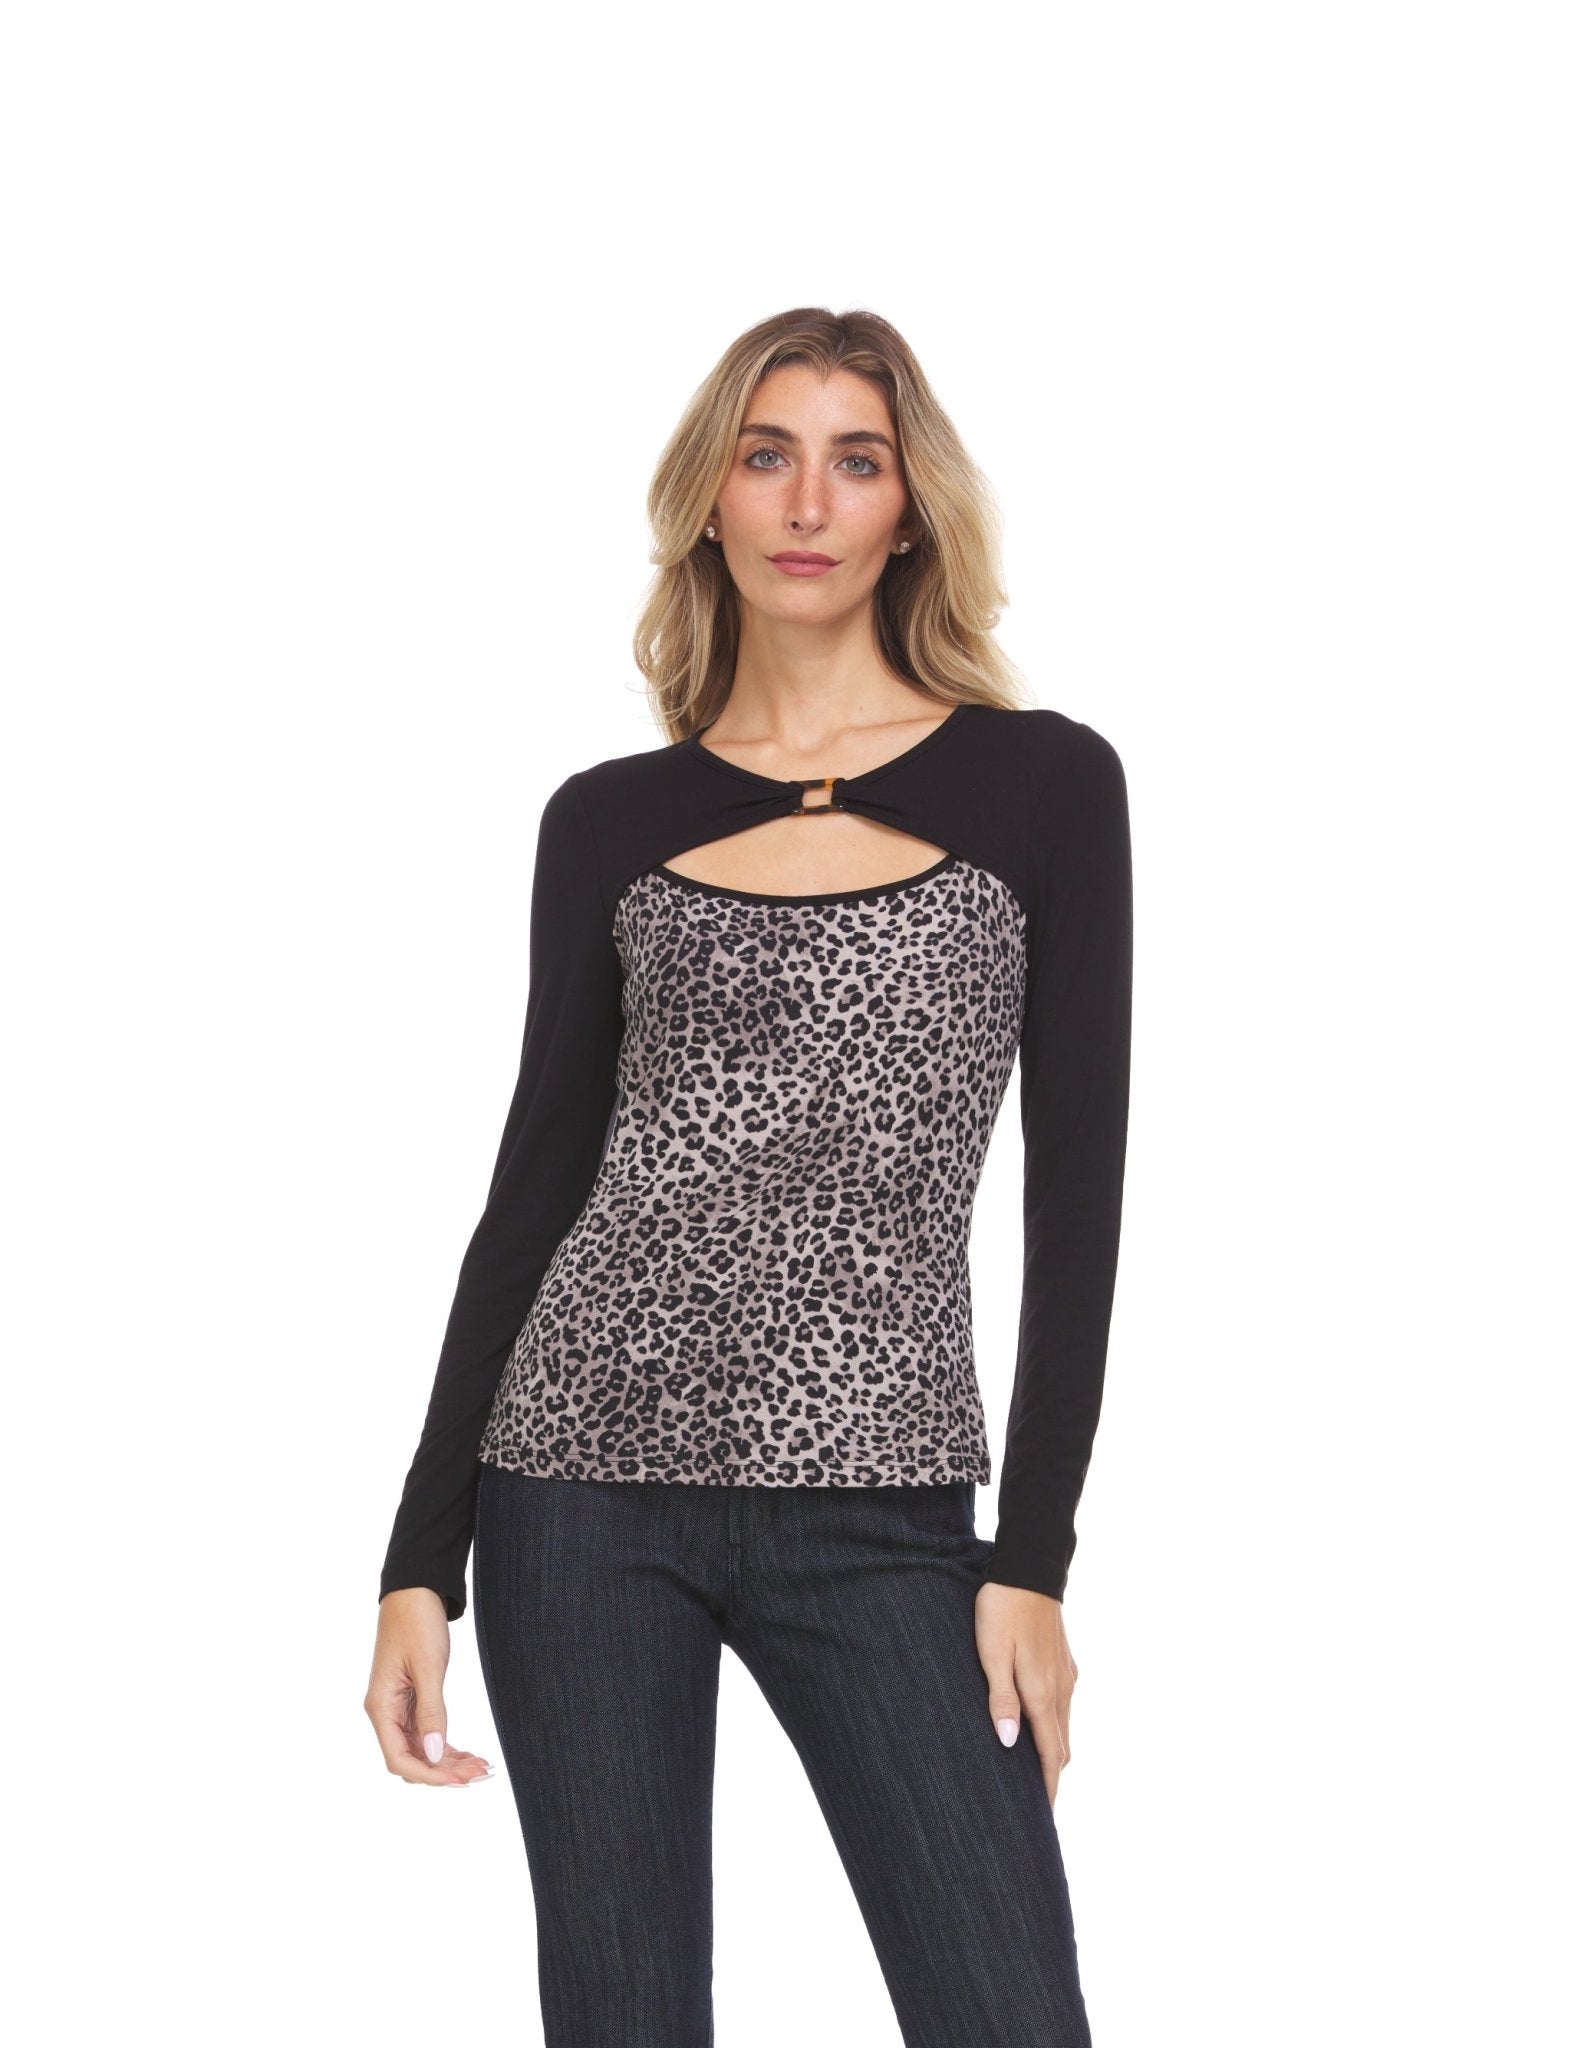 Animal Print With Cut Out Necklace Novelty Top - DressbarnShirts & Blouses